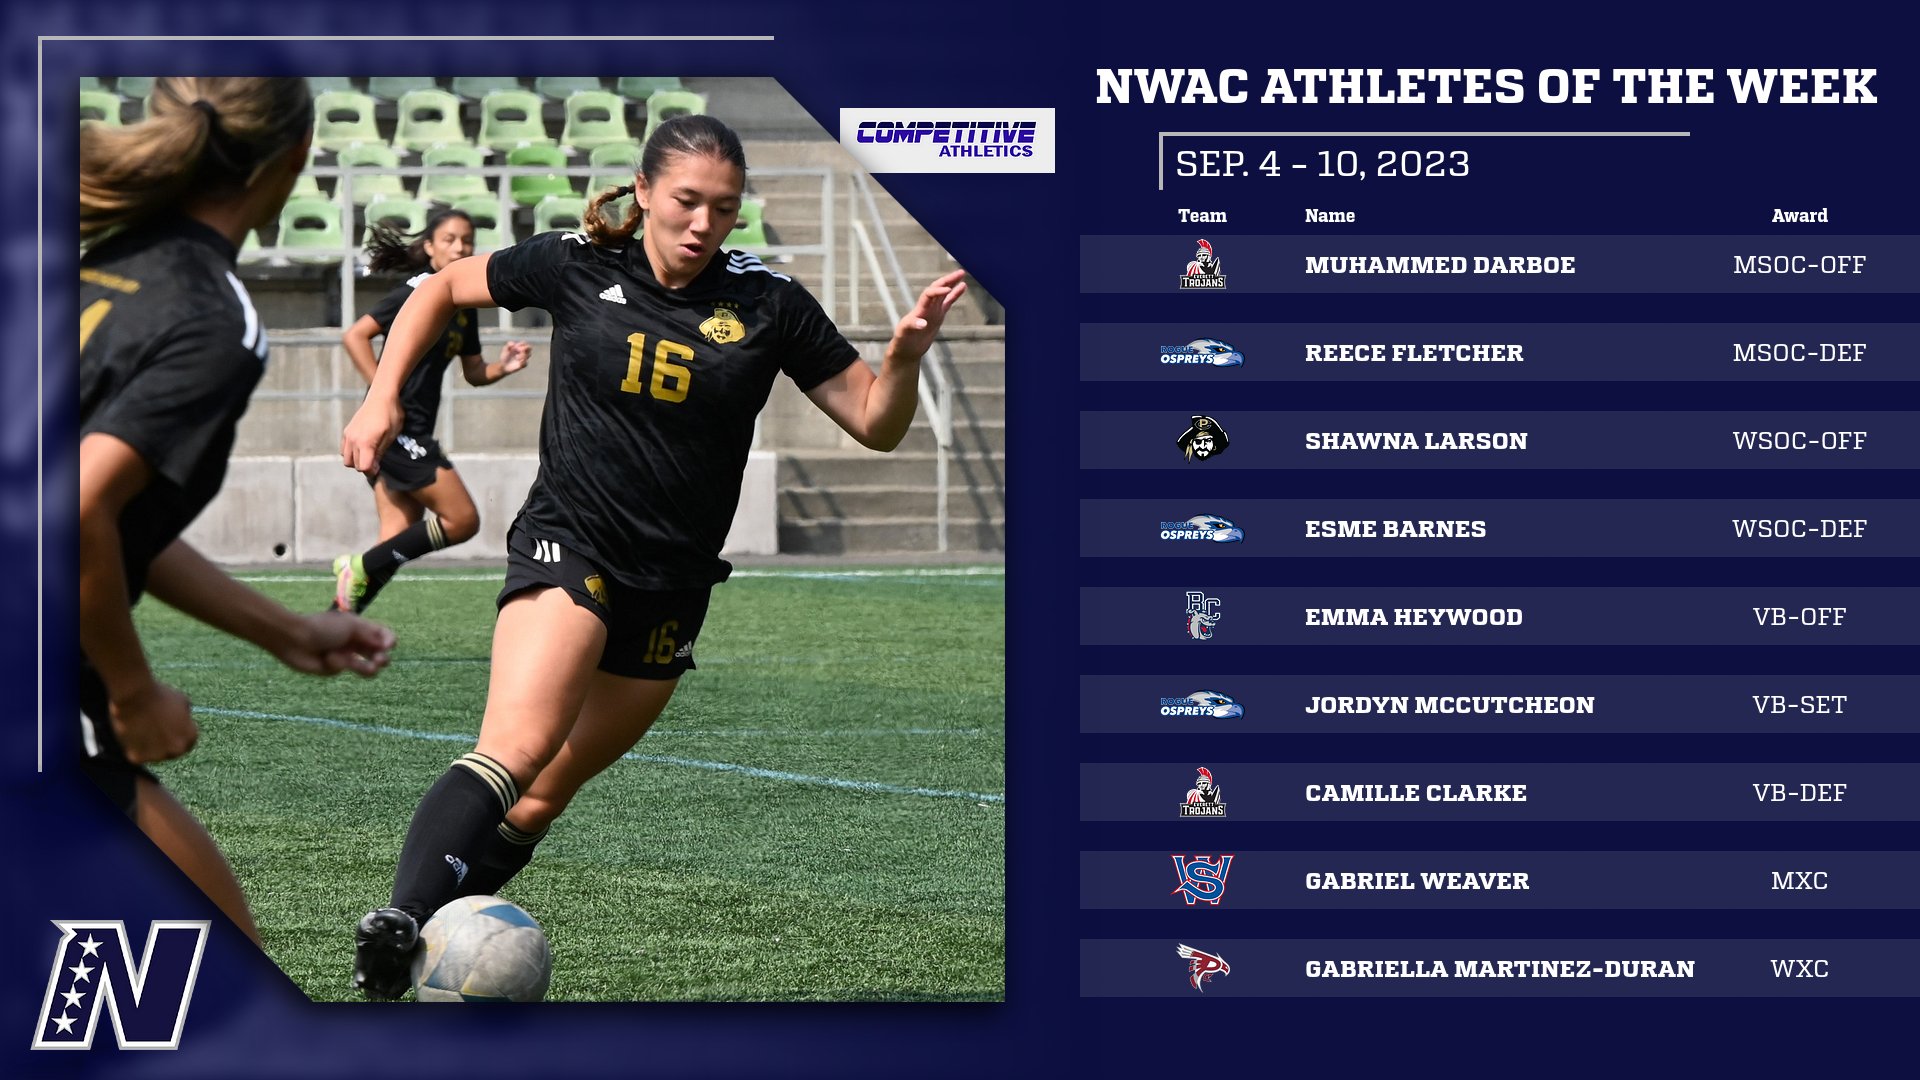 Competitive Athletics NWAC Athletes of the Week: Sep. 4 - 10, 2023